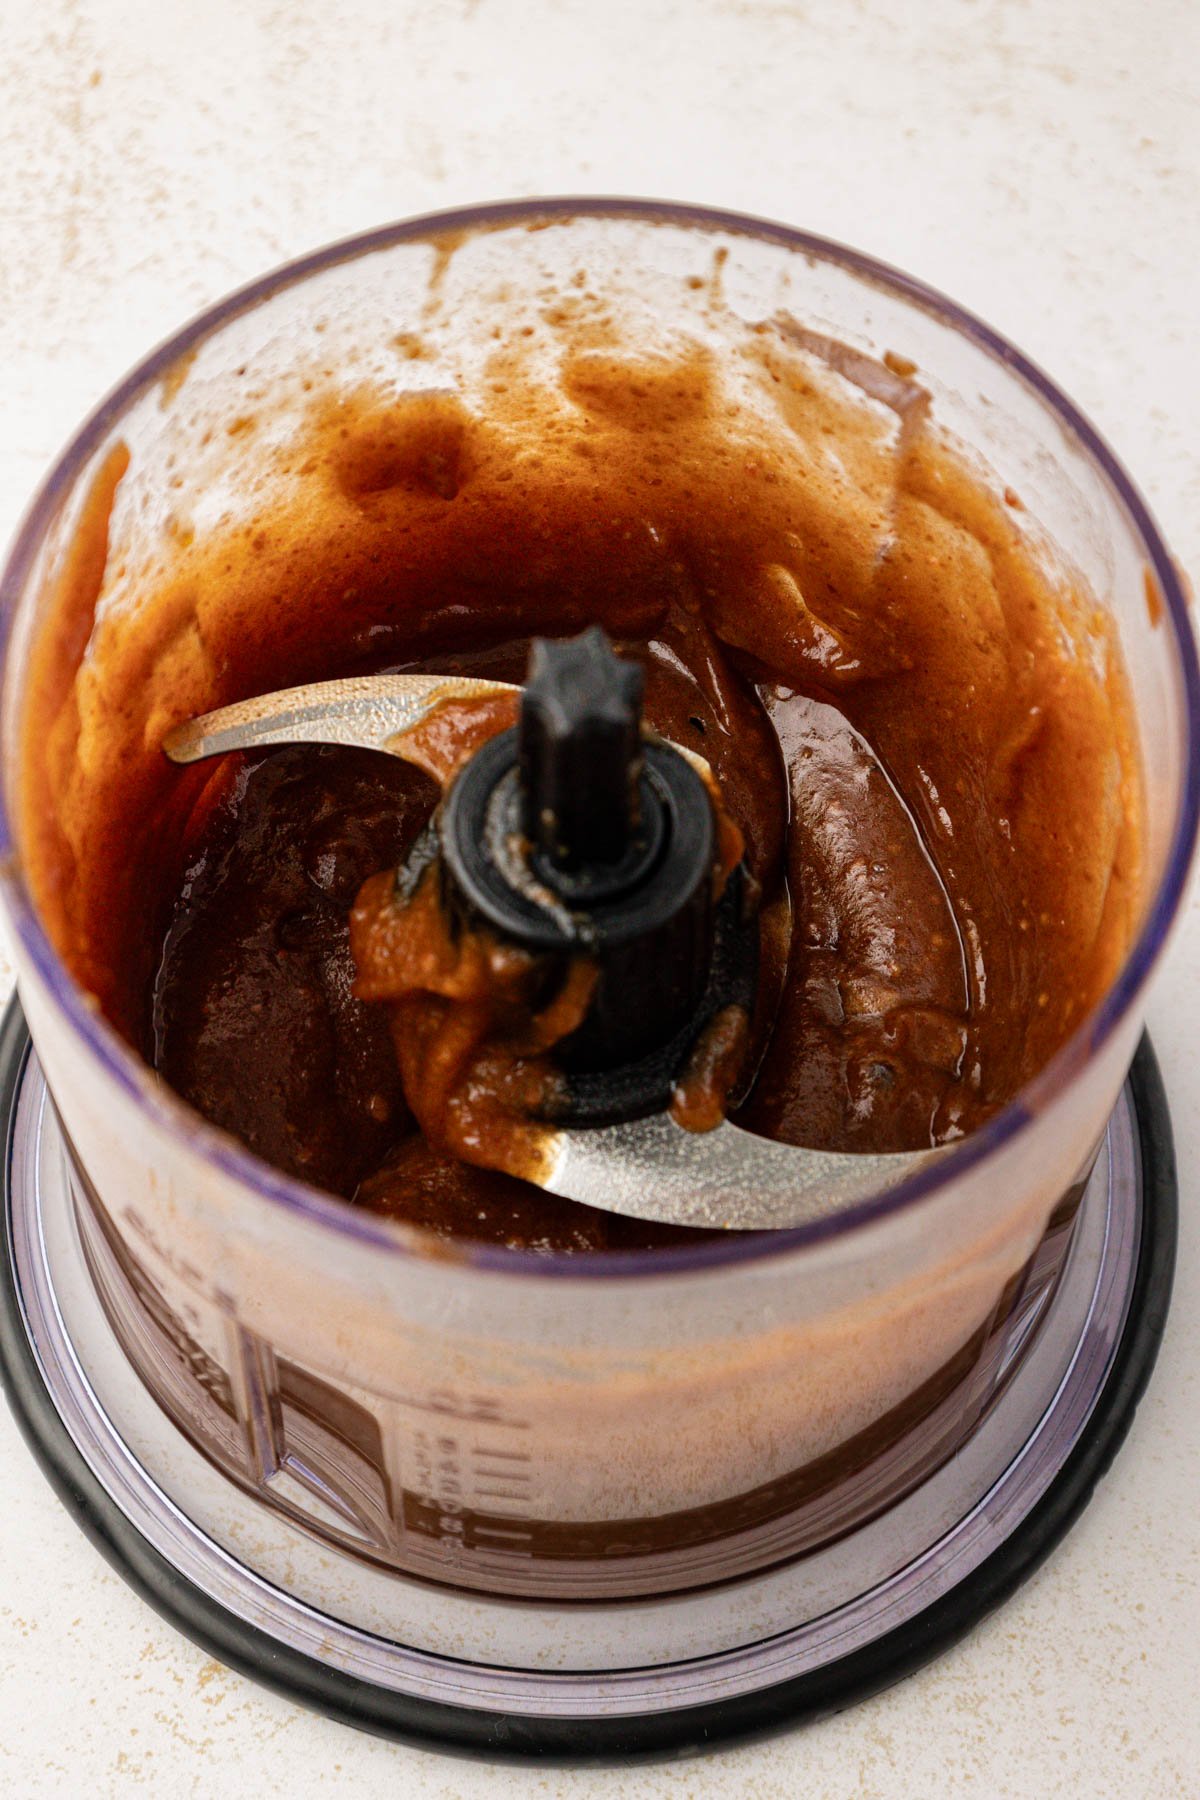 Dates and water pureed in a food processor.